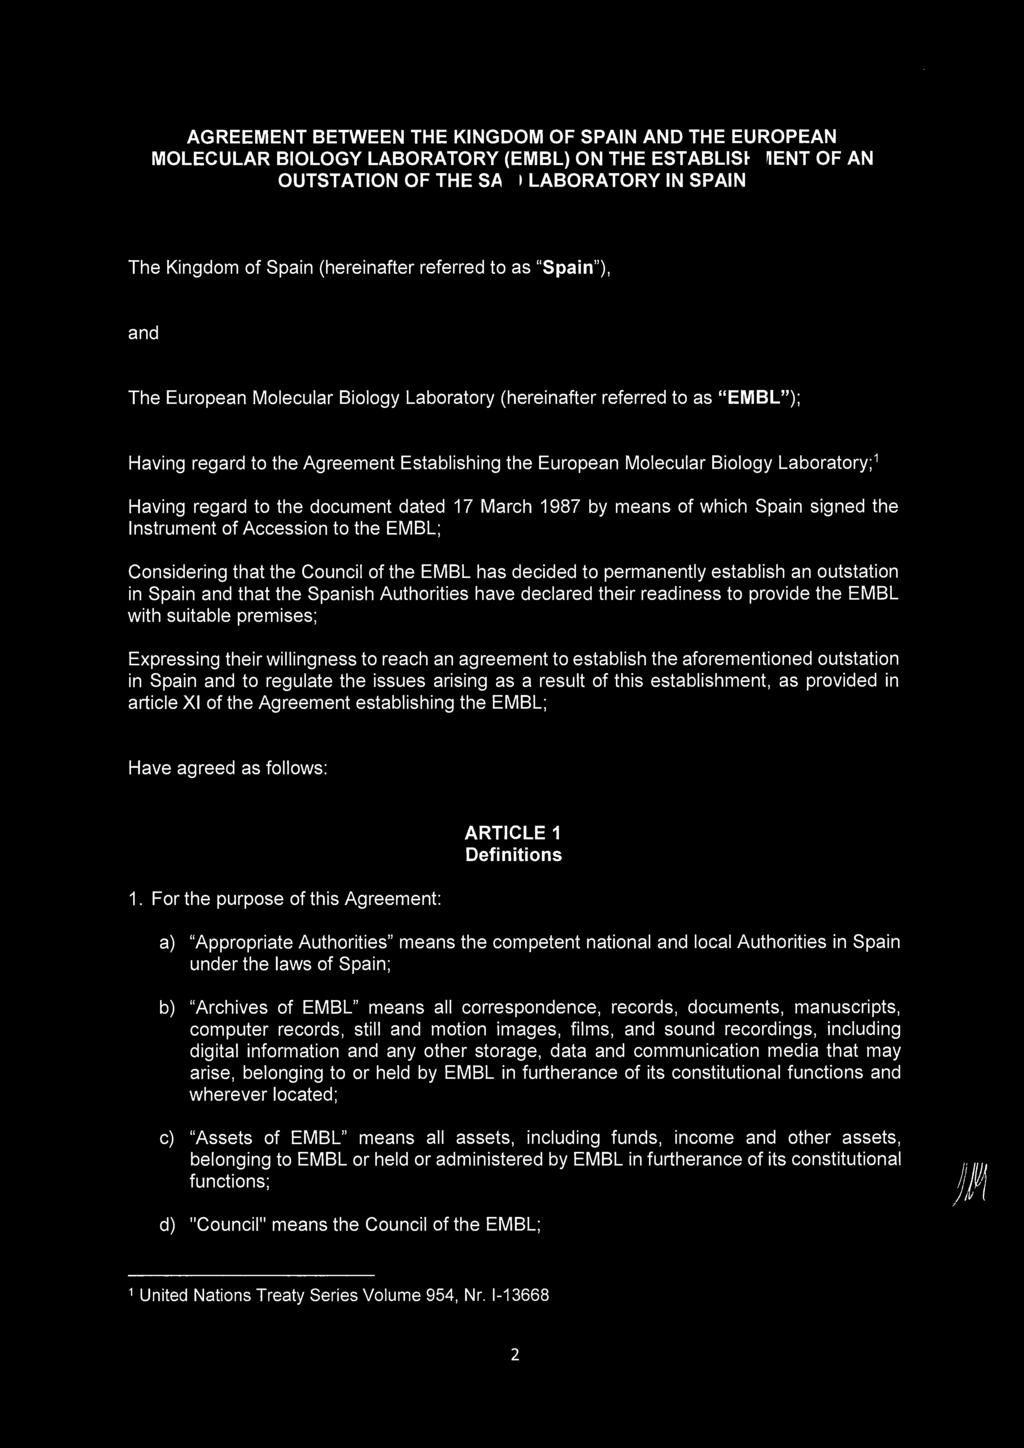 AGREEMENT BETWEEN THE KINGDOM OF SPAIN AND THE EUROPEAN MOLECULAR BIOLOGY LABORATORY (EMBL) ON THE ESTABLISHMENT OF AN OUTSTATION OF THE SAID LABORATORY IN SPAIN The Kingdom of Spain (hereinafter